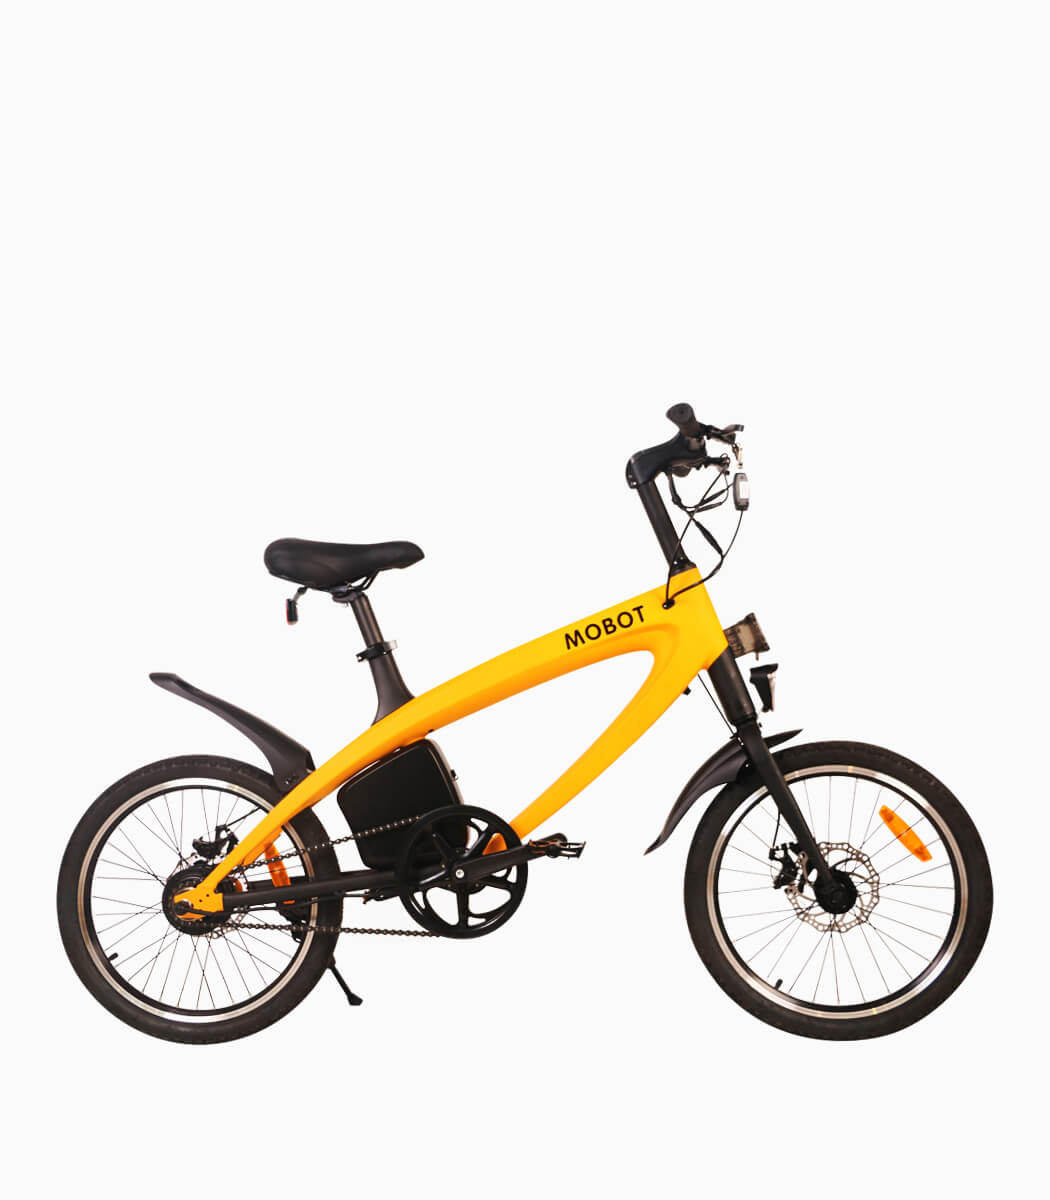 MOBOT OVO (ORANGE) LTA approved electric bicycle right (V1)